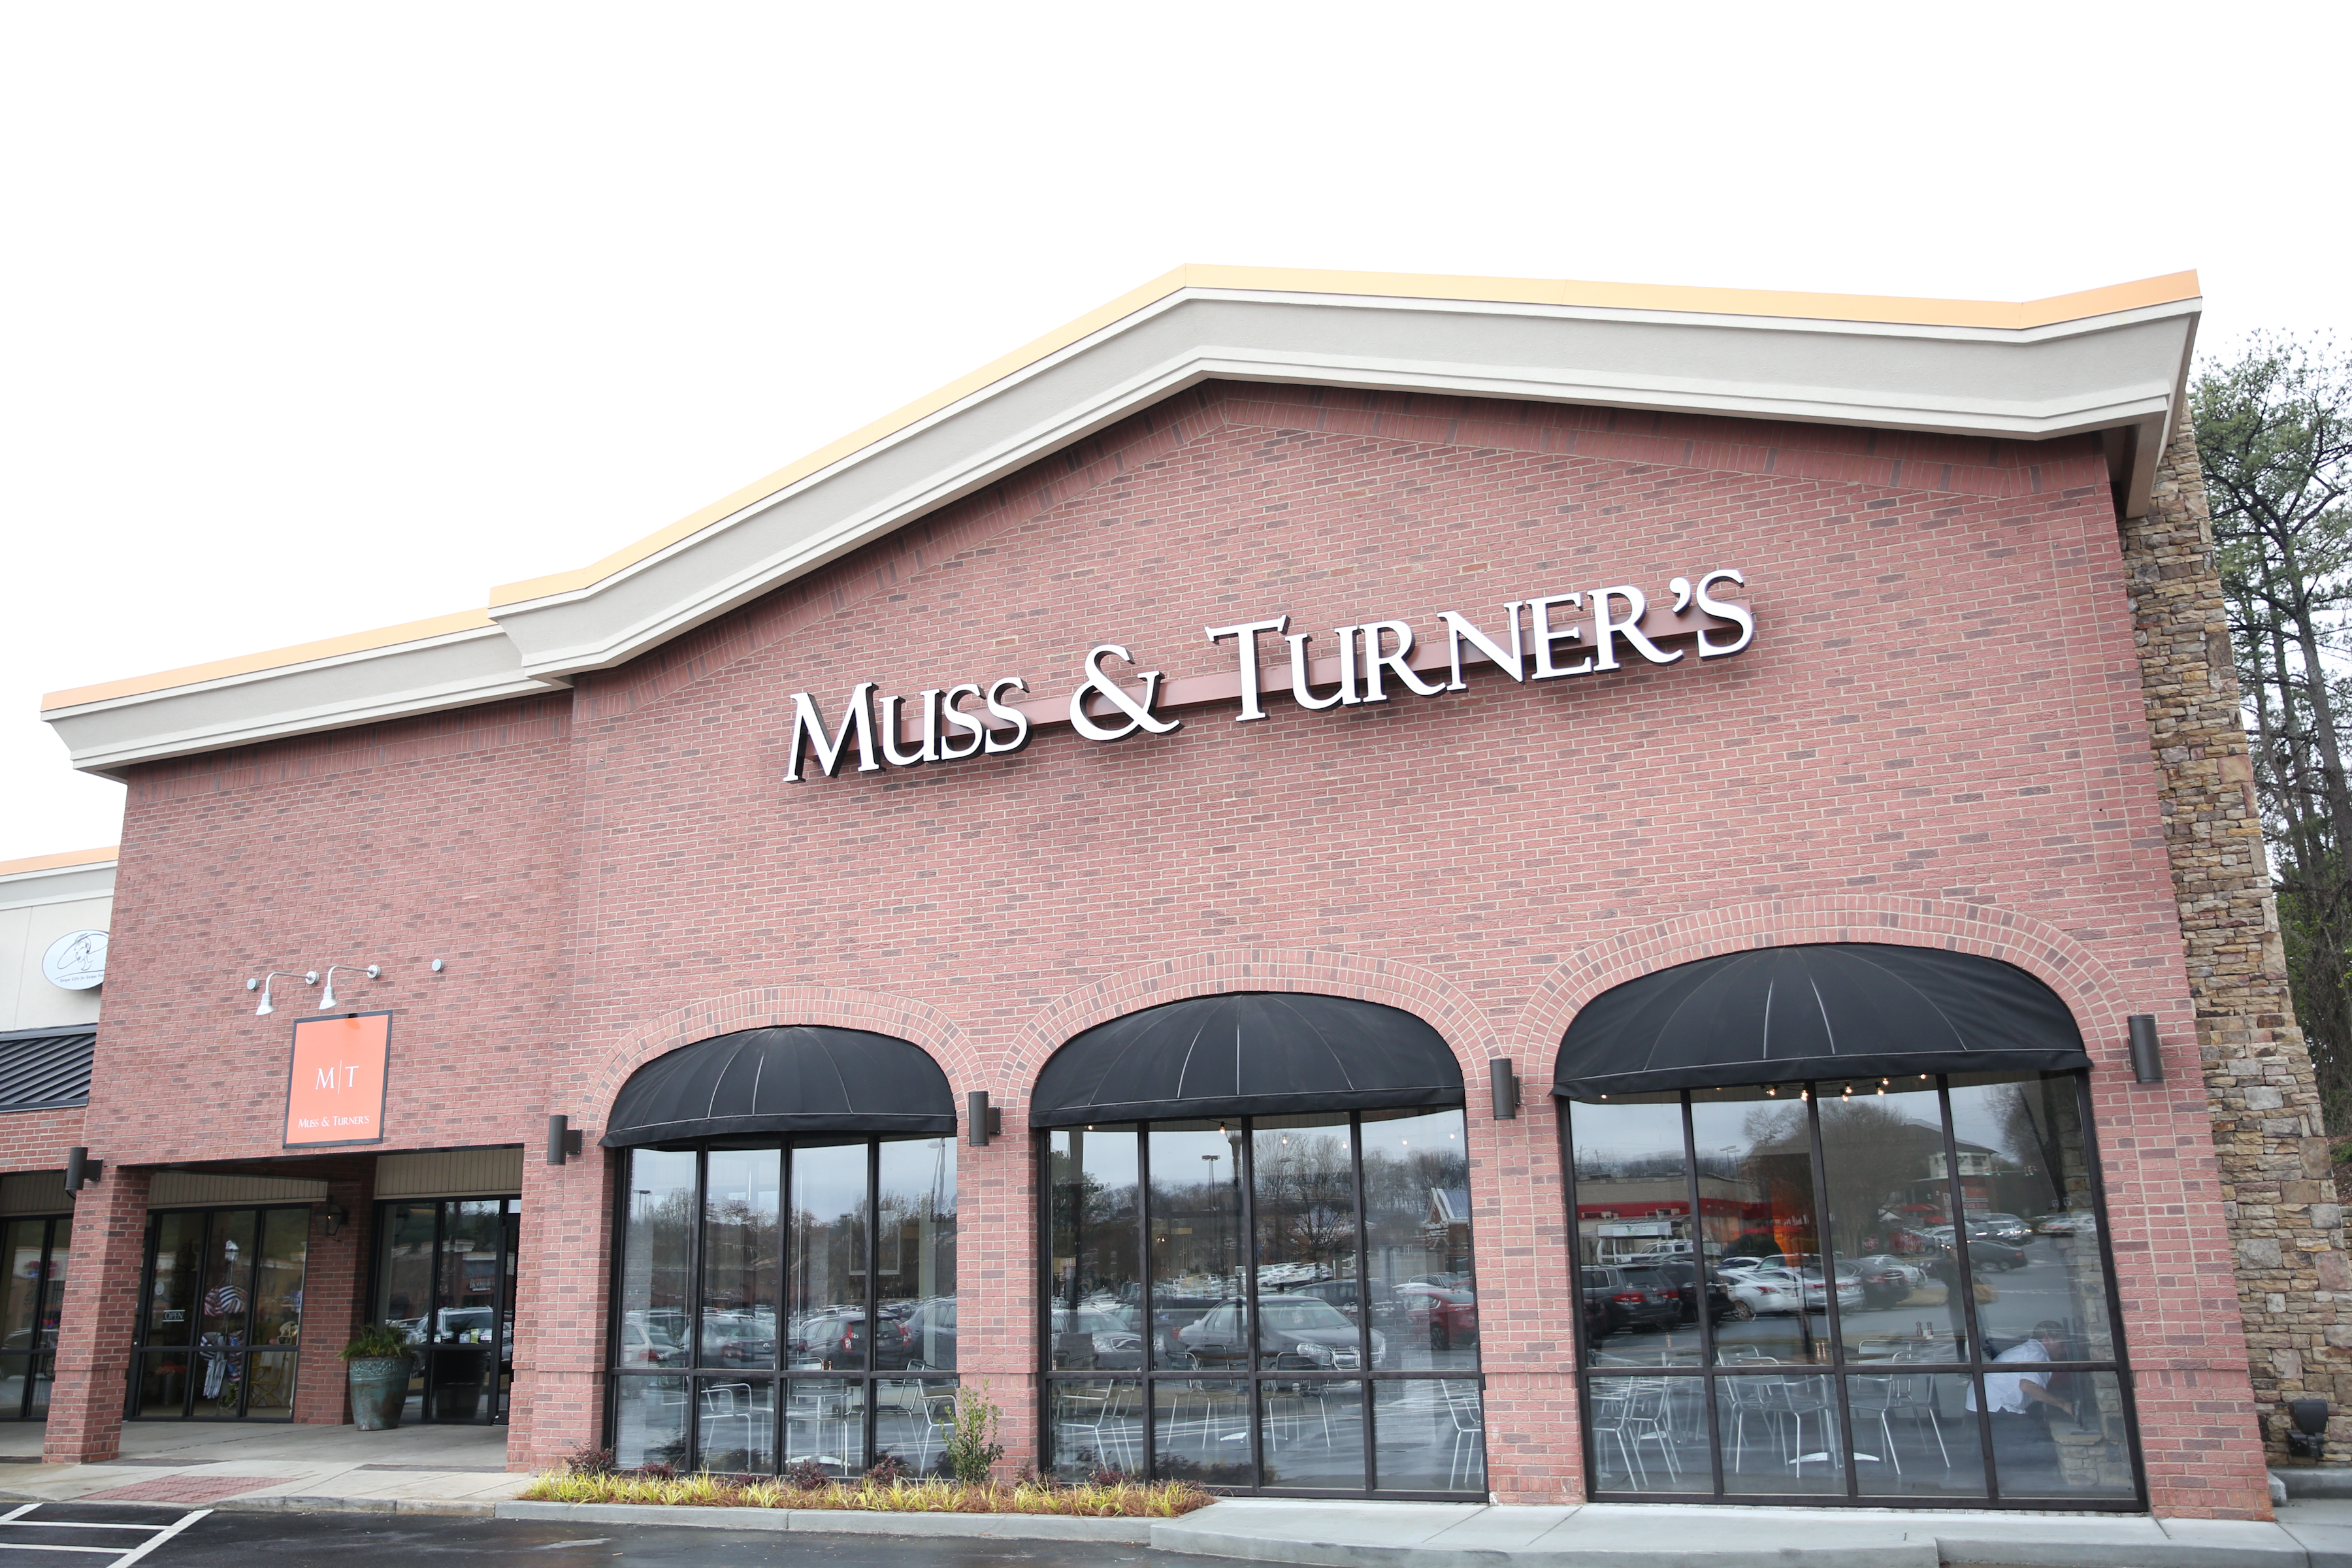 Facebook Friday Freebie!  Enter to Win A “Back to School” Freebie from Muss & Turner’s East Cobb!